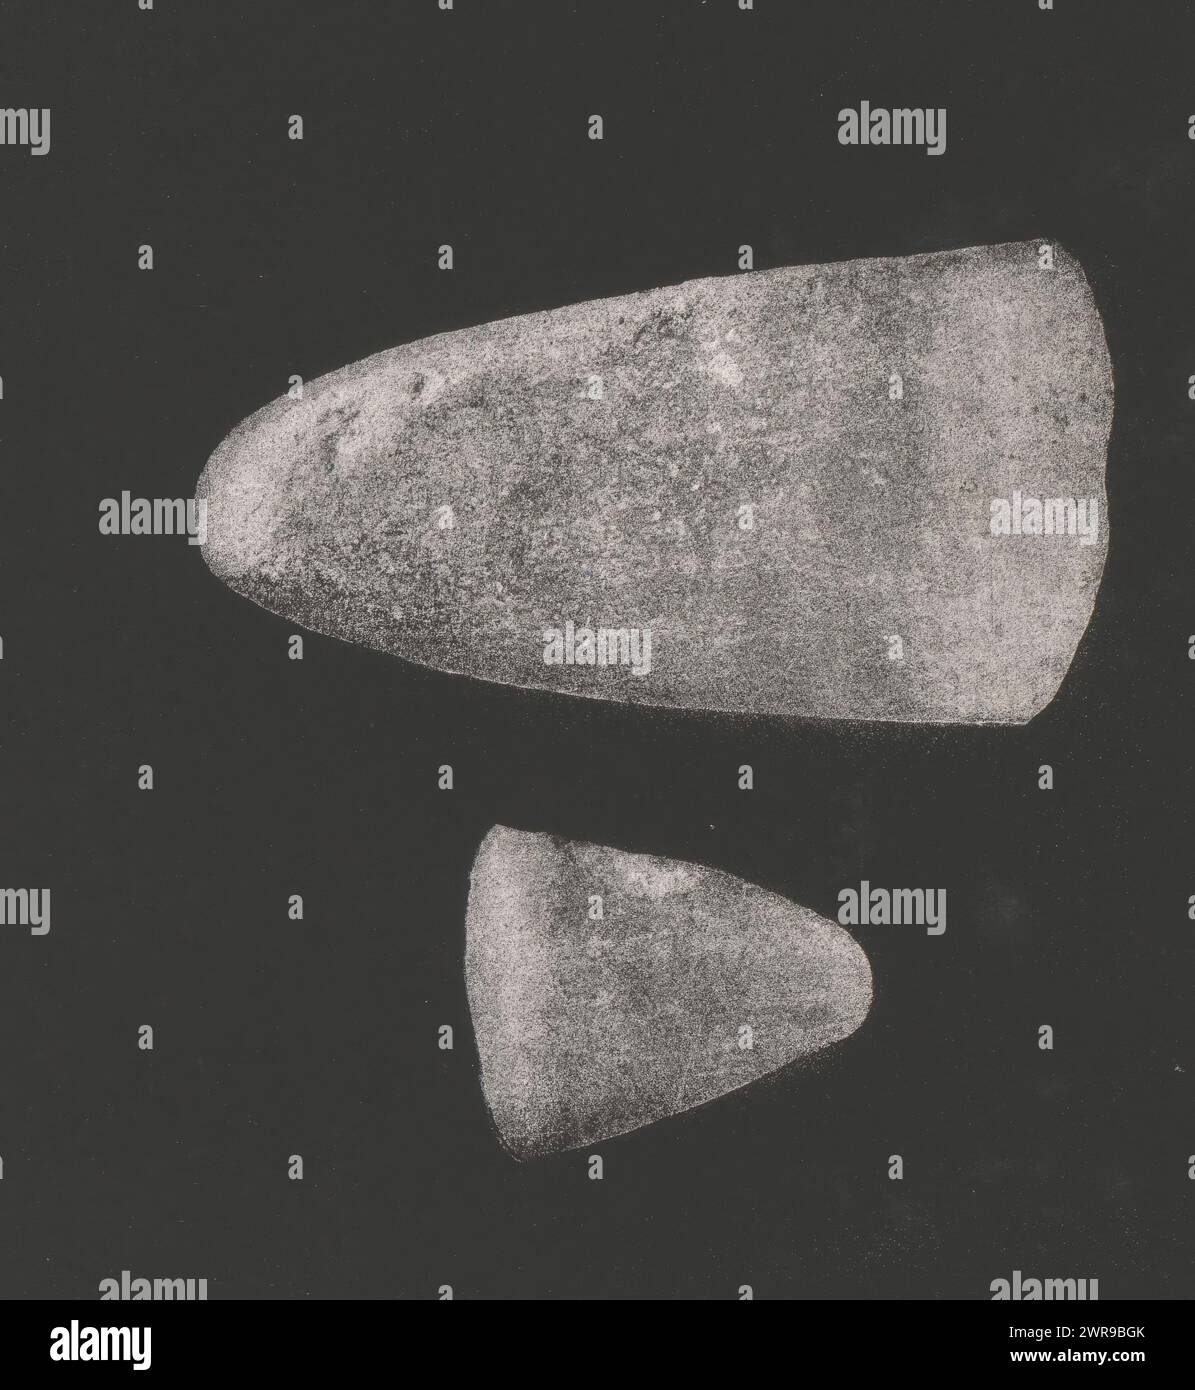 Polished granite axes, Haches polies en roche granitique (title on object), Ville de Paris, (possibly), Adolphe Bilordeaux, (possibly), printer: Ville de Paris, (possibly), c. 1864 - in or before 1869, paper, photolithography, height 240 mm × width 190 mm, photomechanical print Stock Photo